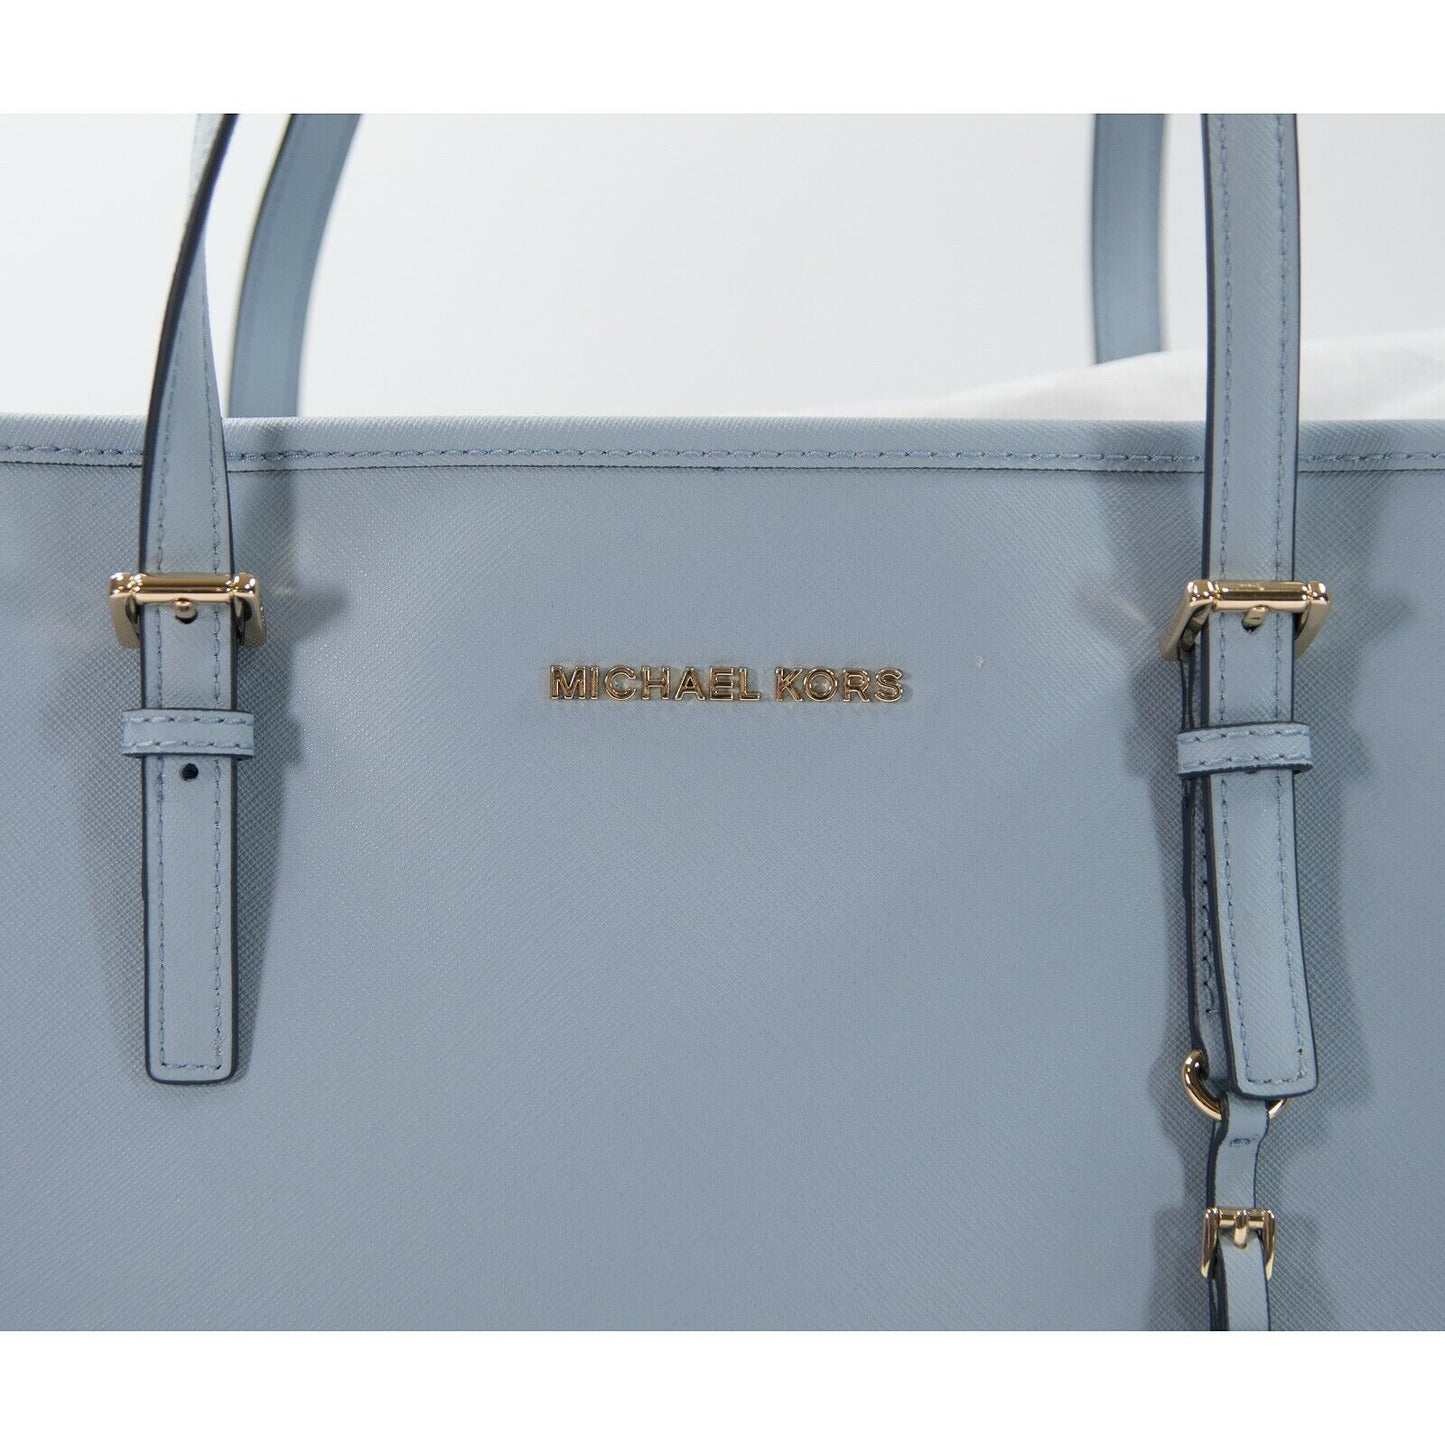 Michael Kors Pale Blue Saffiano Leather Multifunction Travel Tote Bag NWT